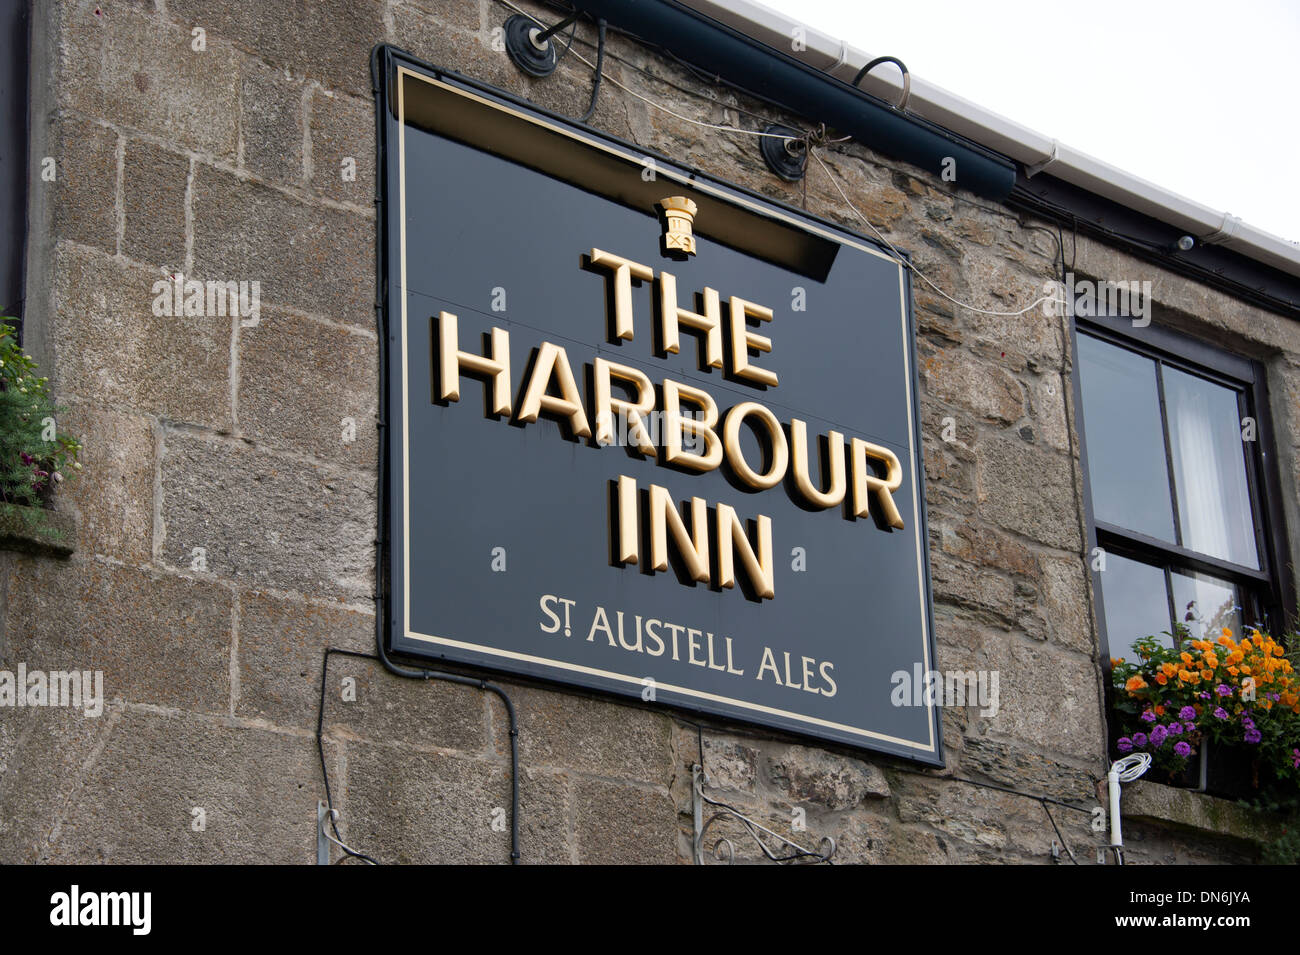 The Harbour Inn St Austell Ales Porthleven Cornwall UK Stock Photo